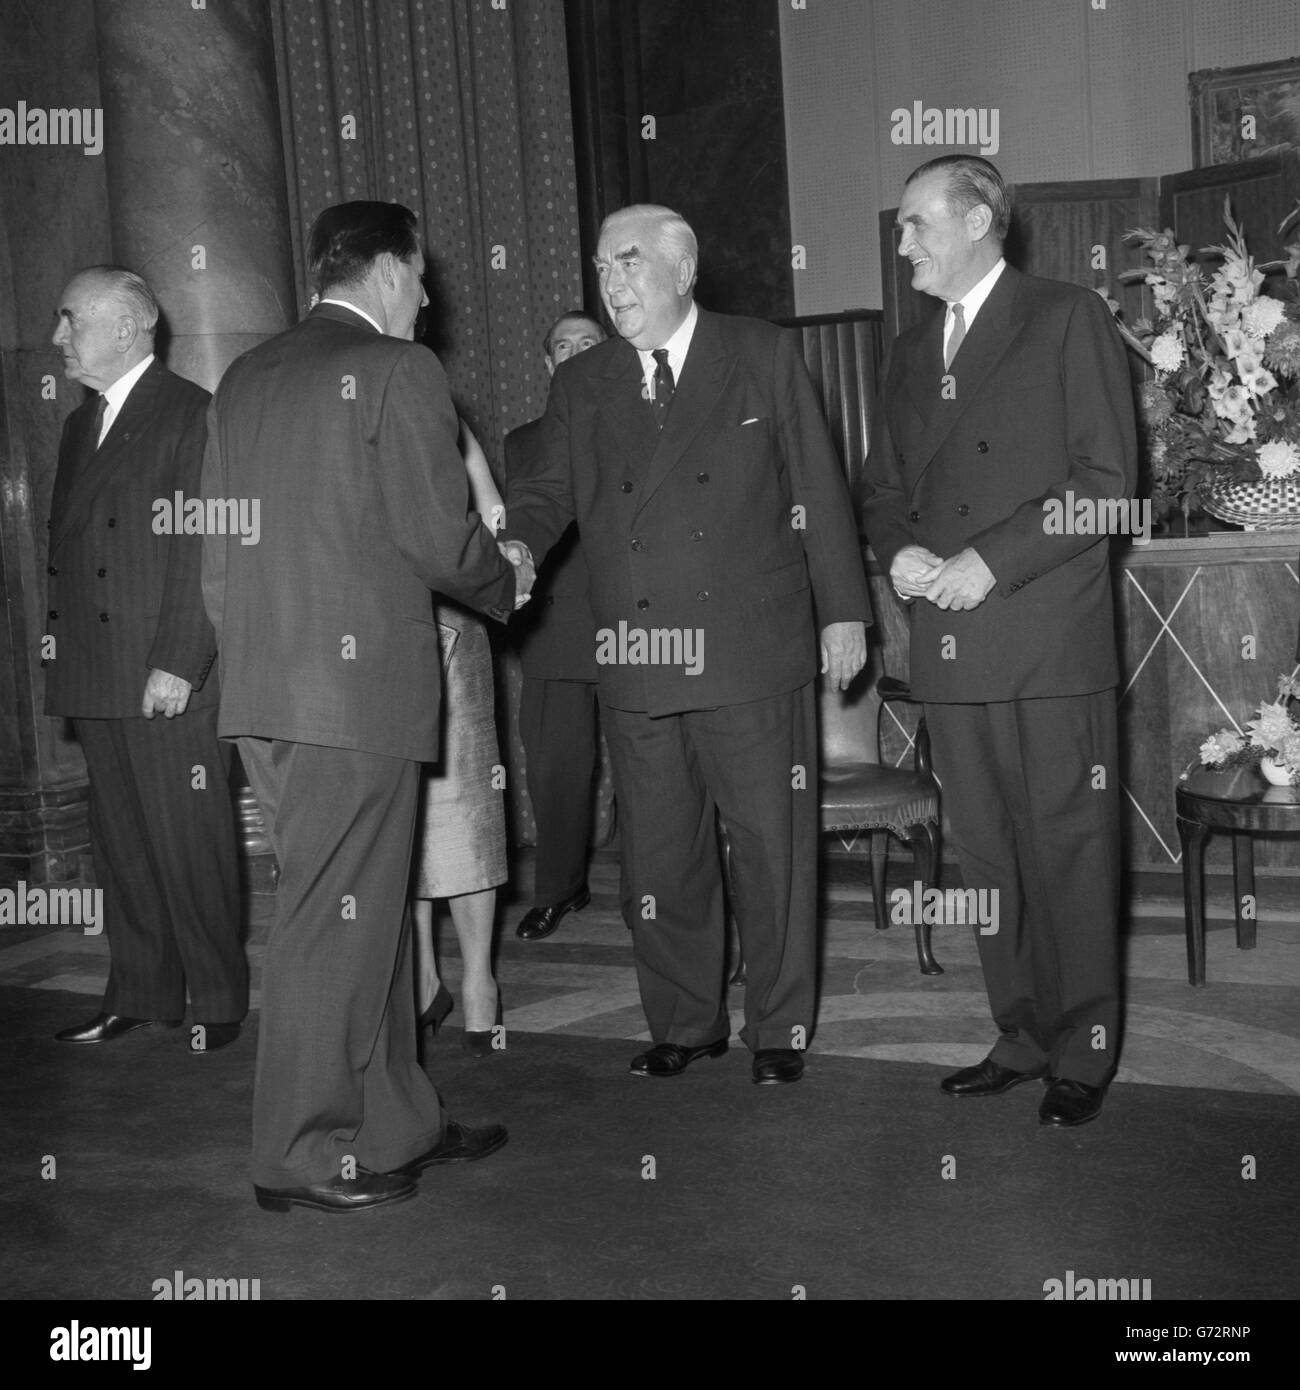 Australia's Prime Minister Robert Menzies (r) greets Jack Brabham,  Australian racing ace and former F1 world champion, at a reception at  Australia House in London. Mr Menzies is in the UK to